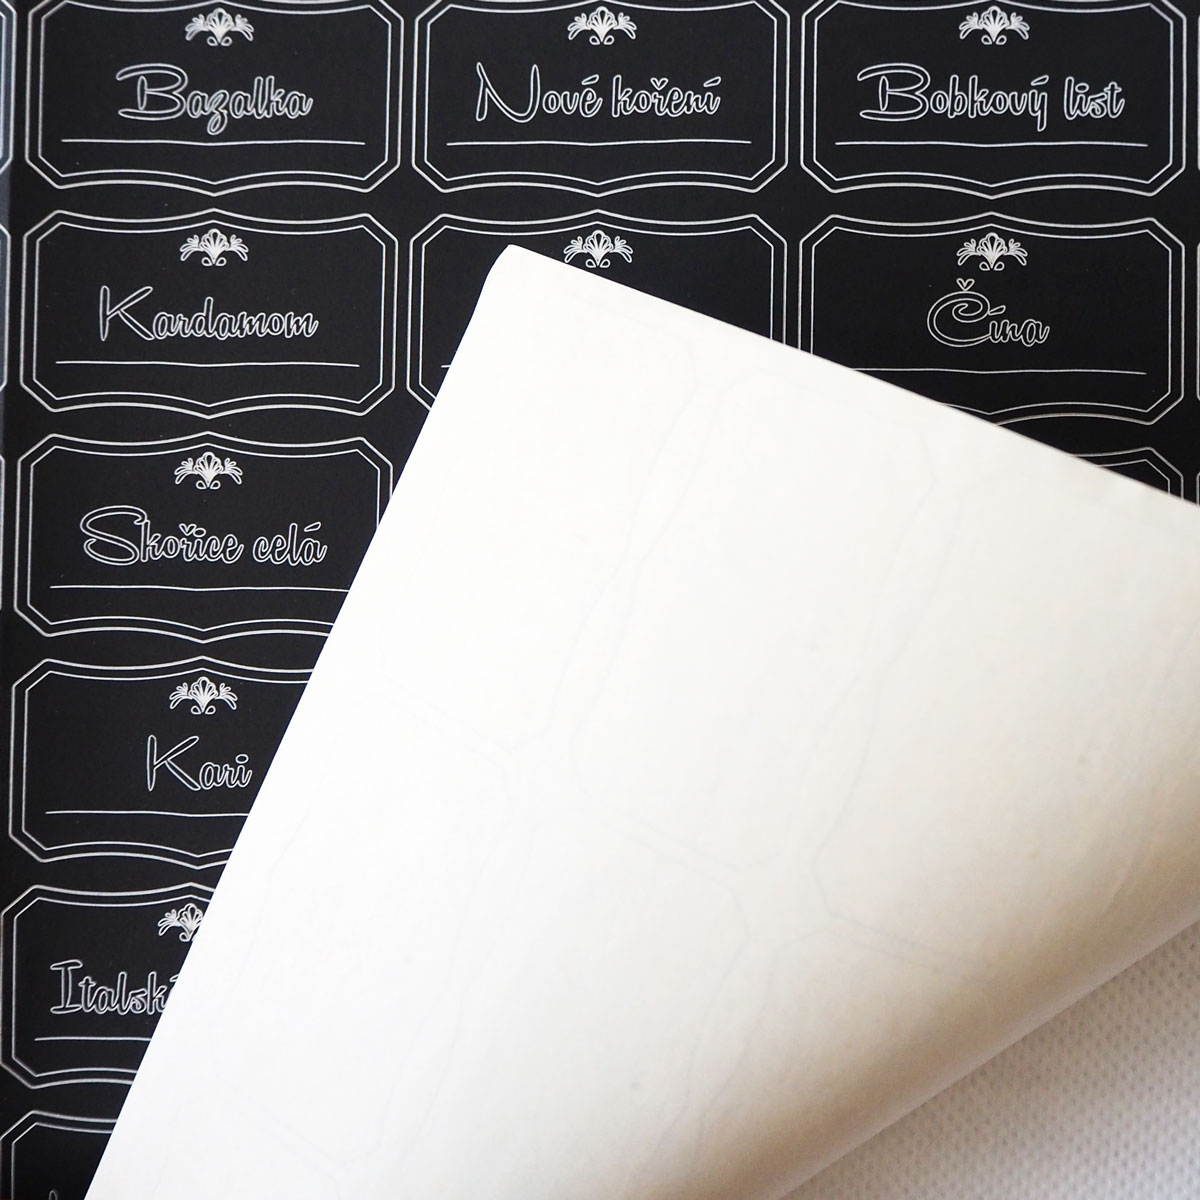 Self-adhesive black paper for laser printers and copiers - 300 sheets